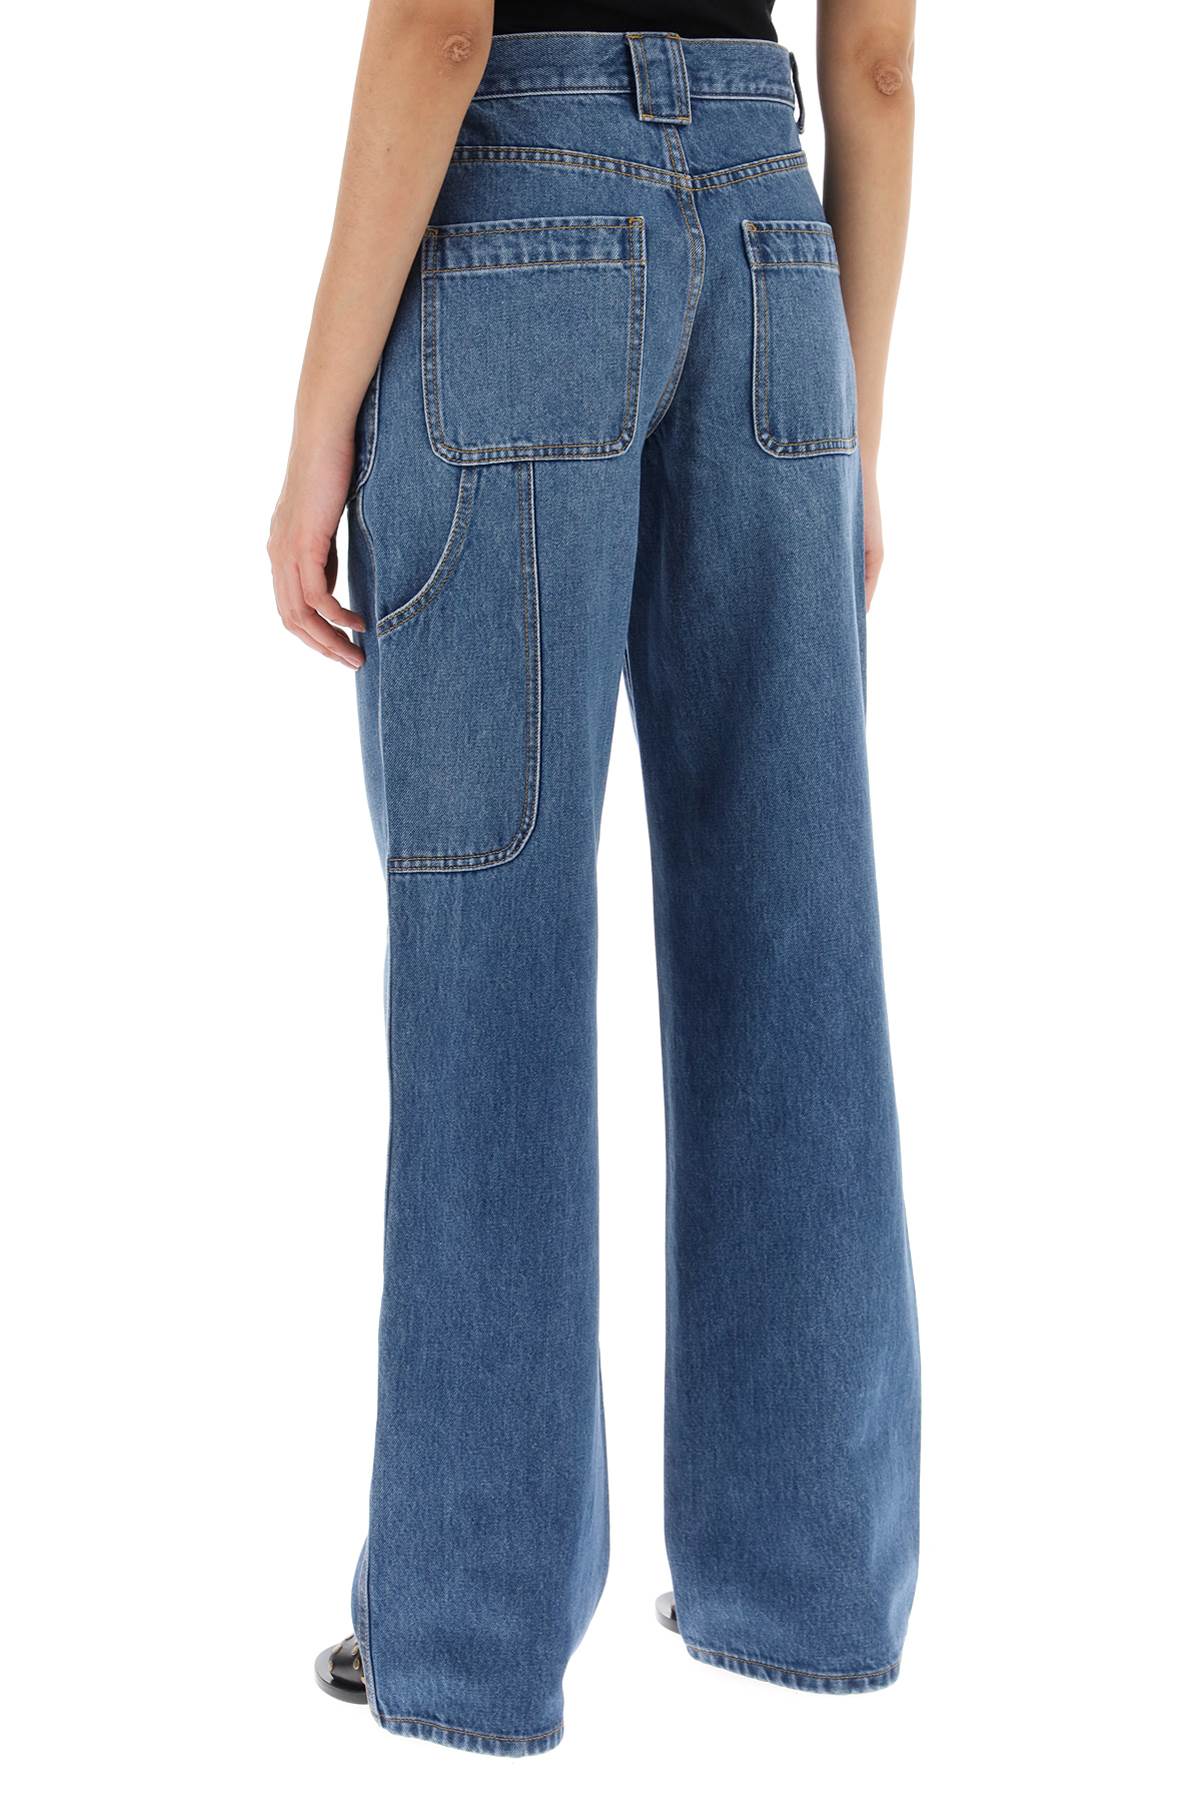 Tory burch high-waisted cargo style jeans in-2